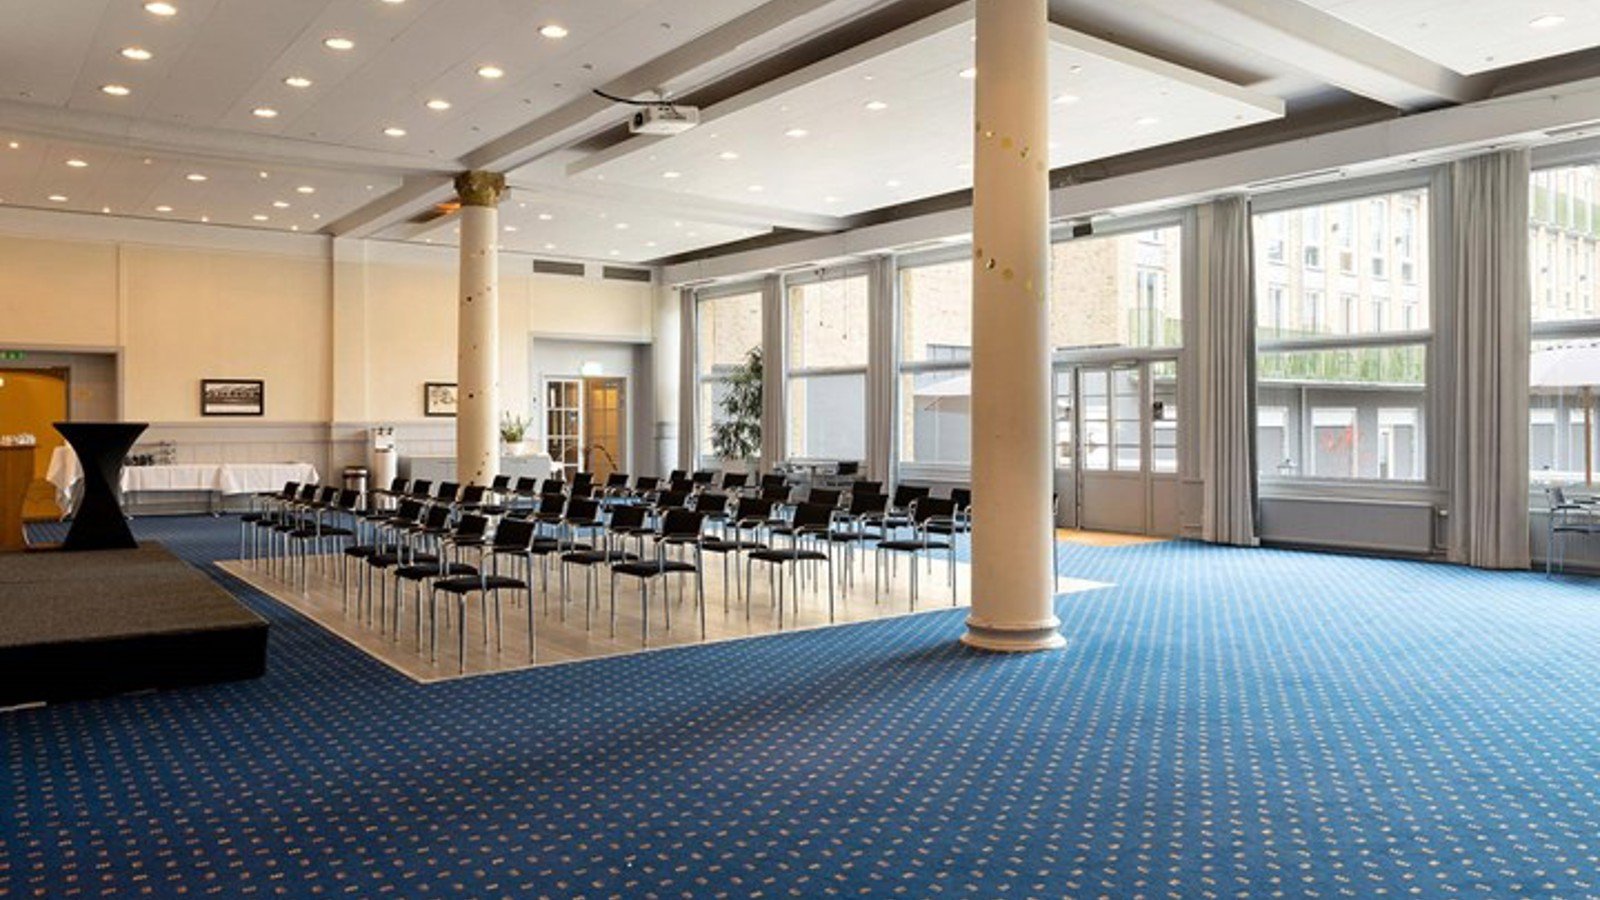 Large room with blue carpet, lined up chairs and large windows